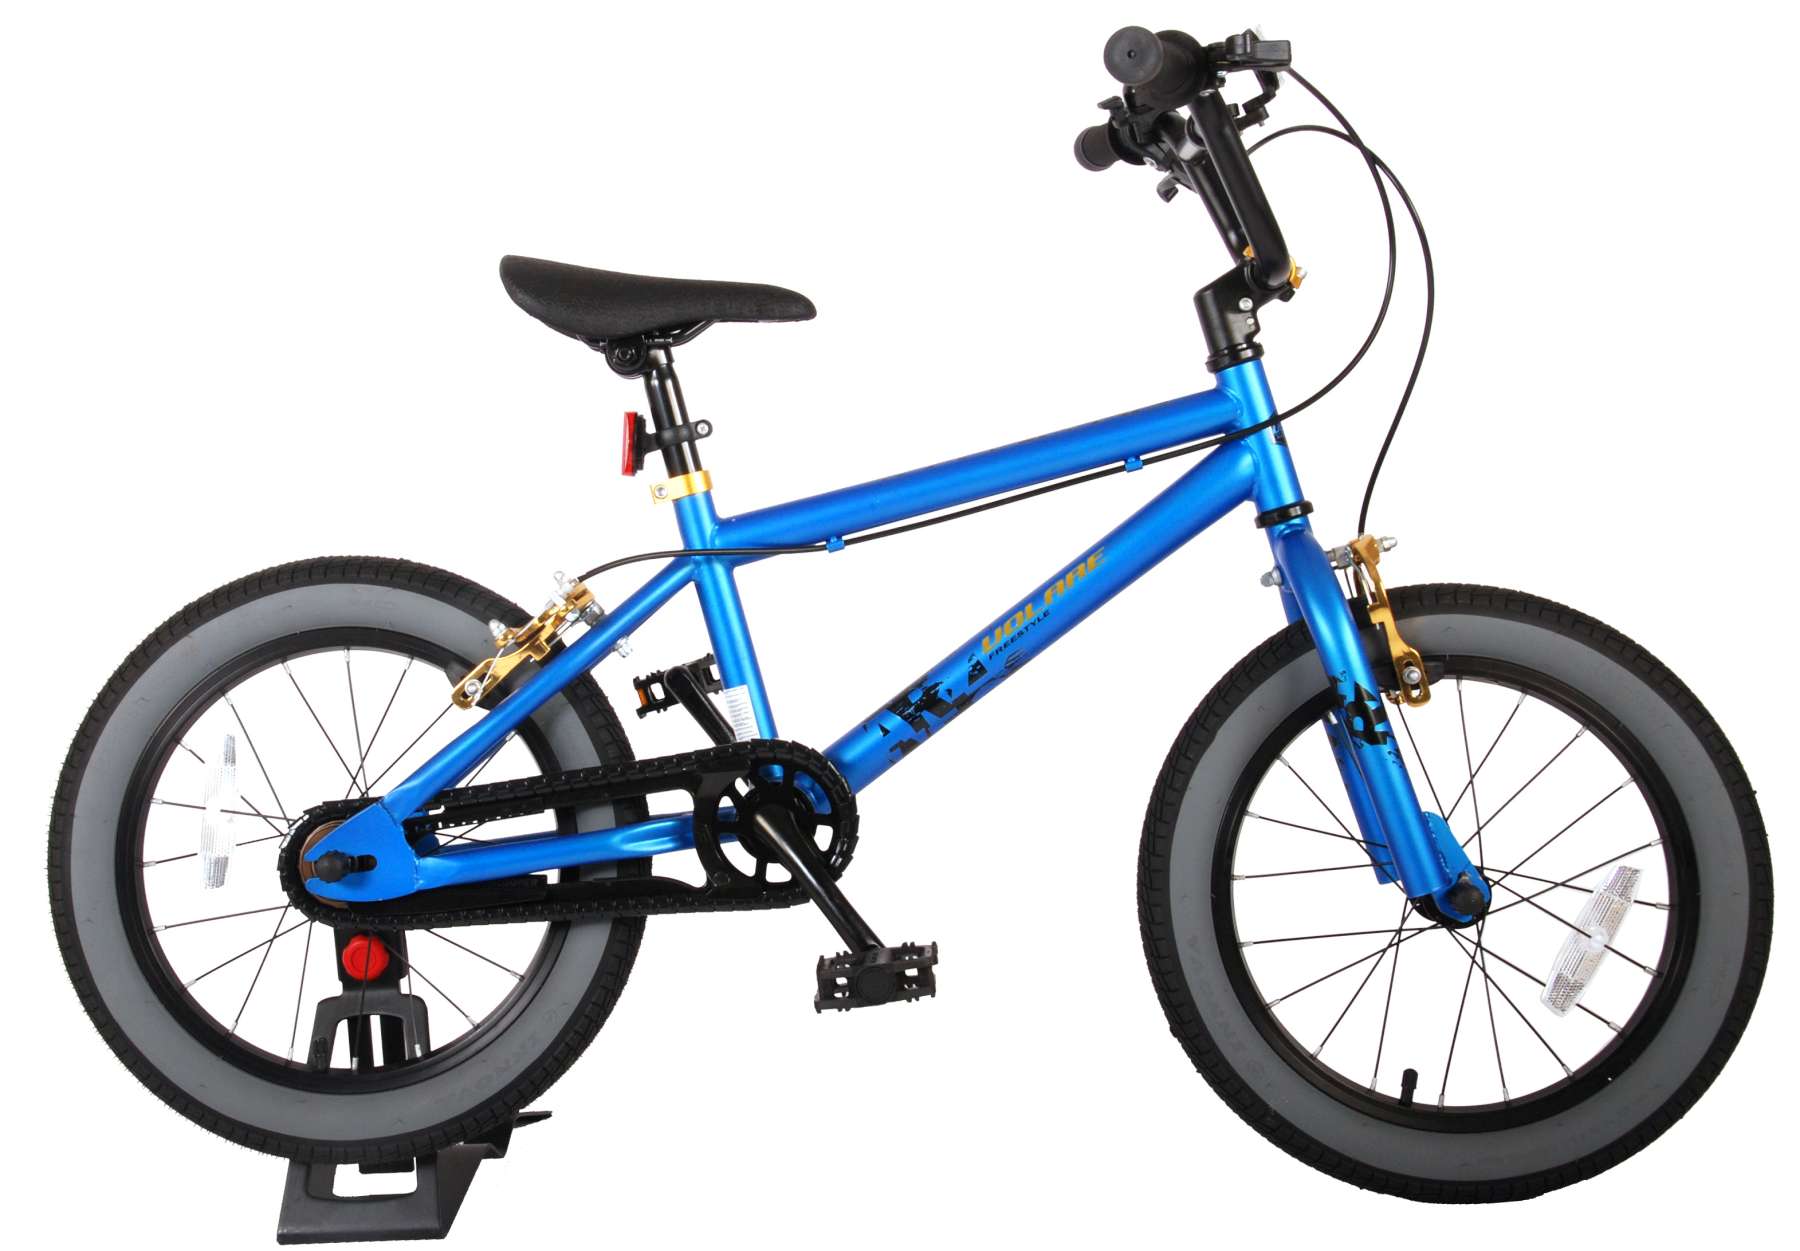 Volare Cool Rider Children's Bicycle - Boys - 16 inch - blue - two hand  brakes - 95% assembled